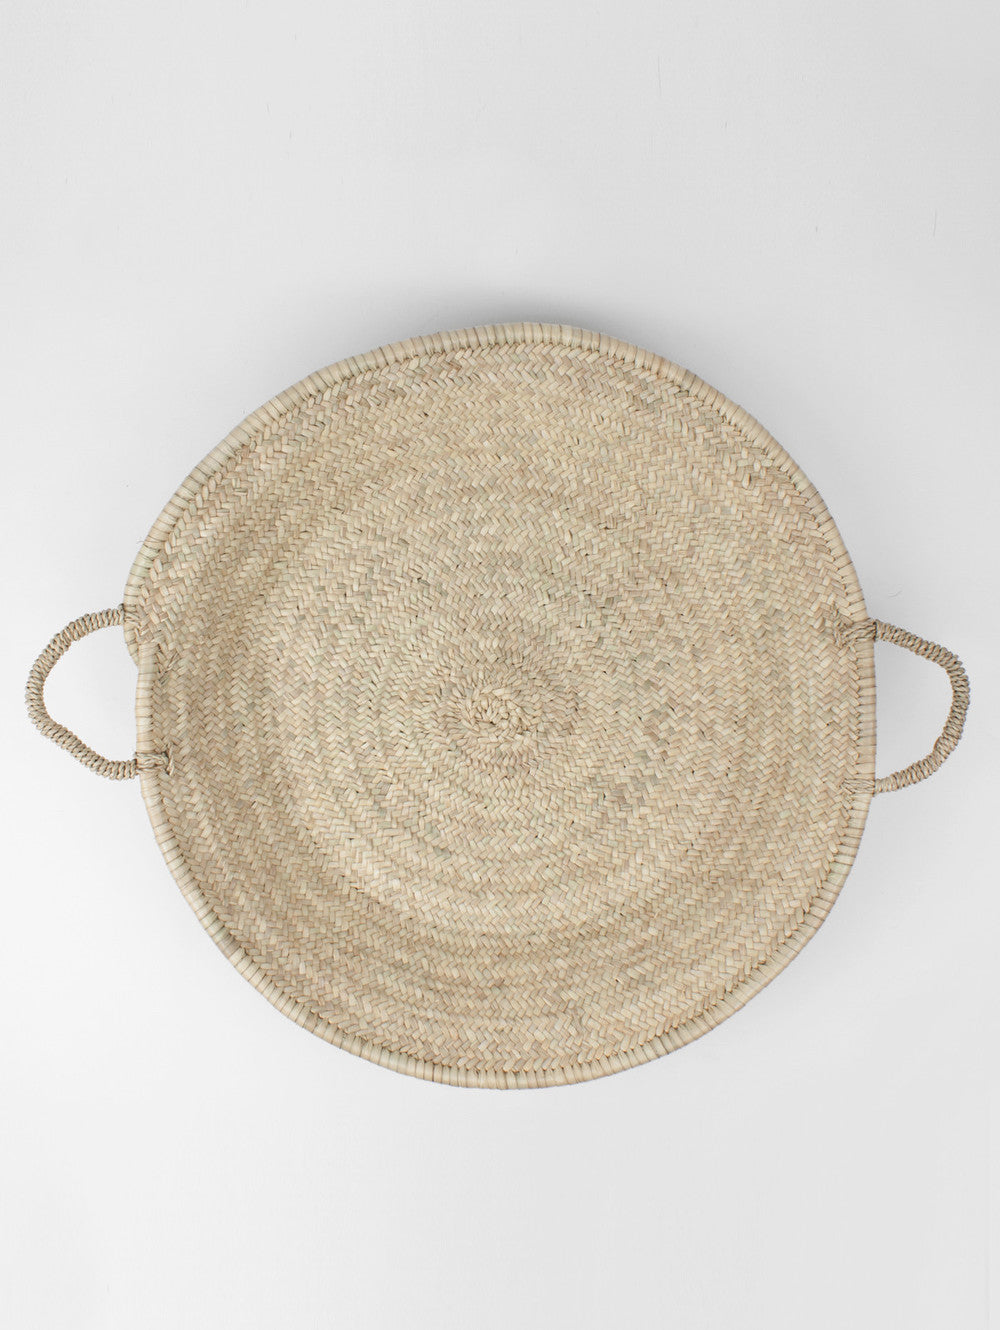 Hand-crafted Woven Platter